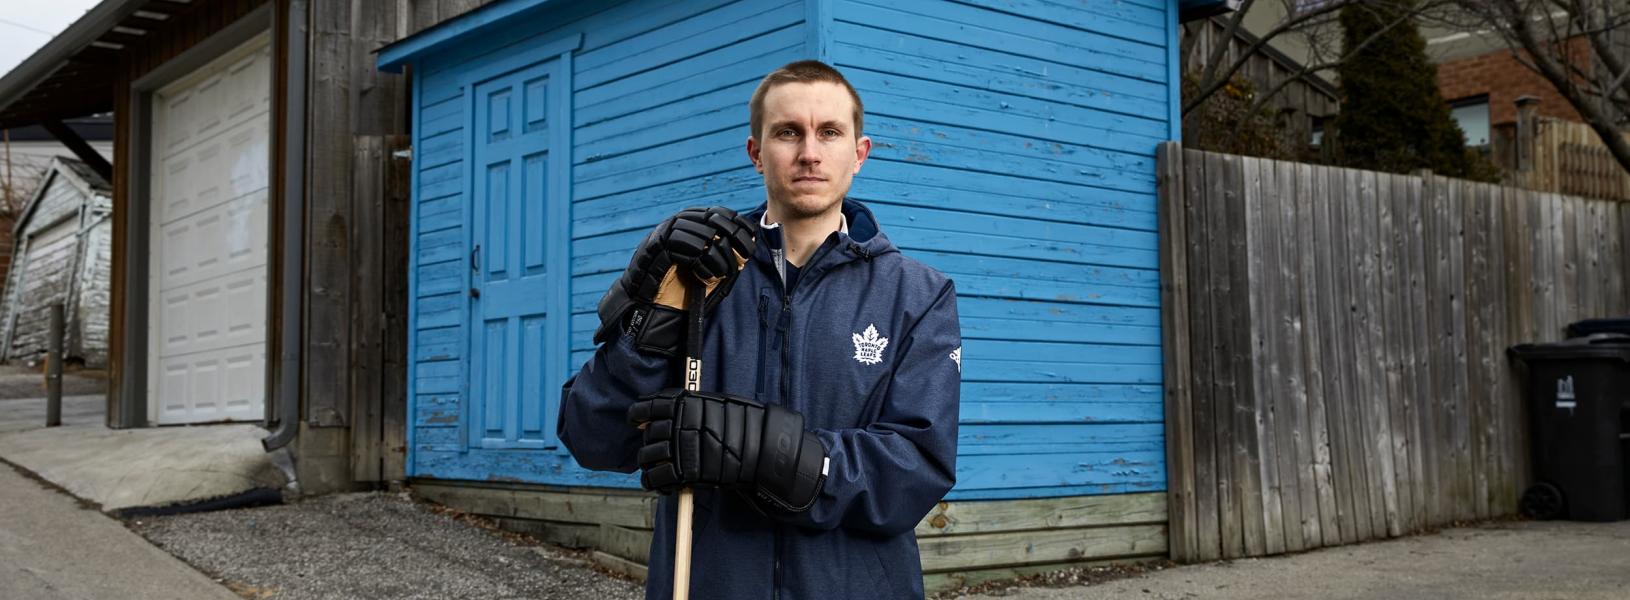 Darryl Metcalfe standing in front of a blue wooden shed holding a hockey stick and wearing hockey gloves.